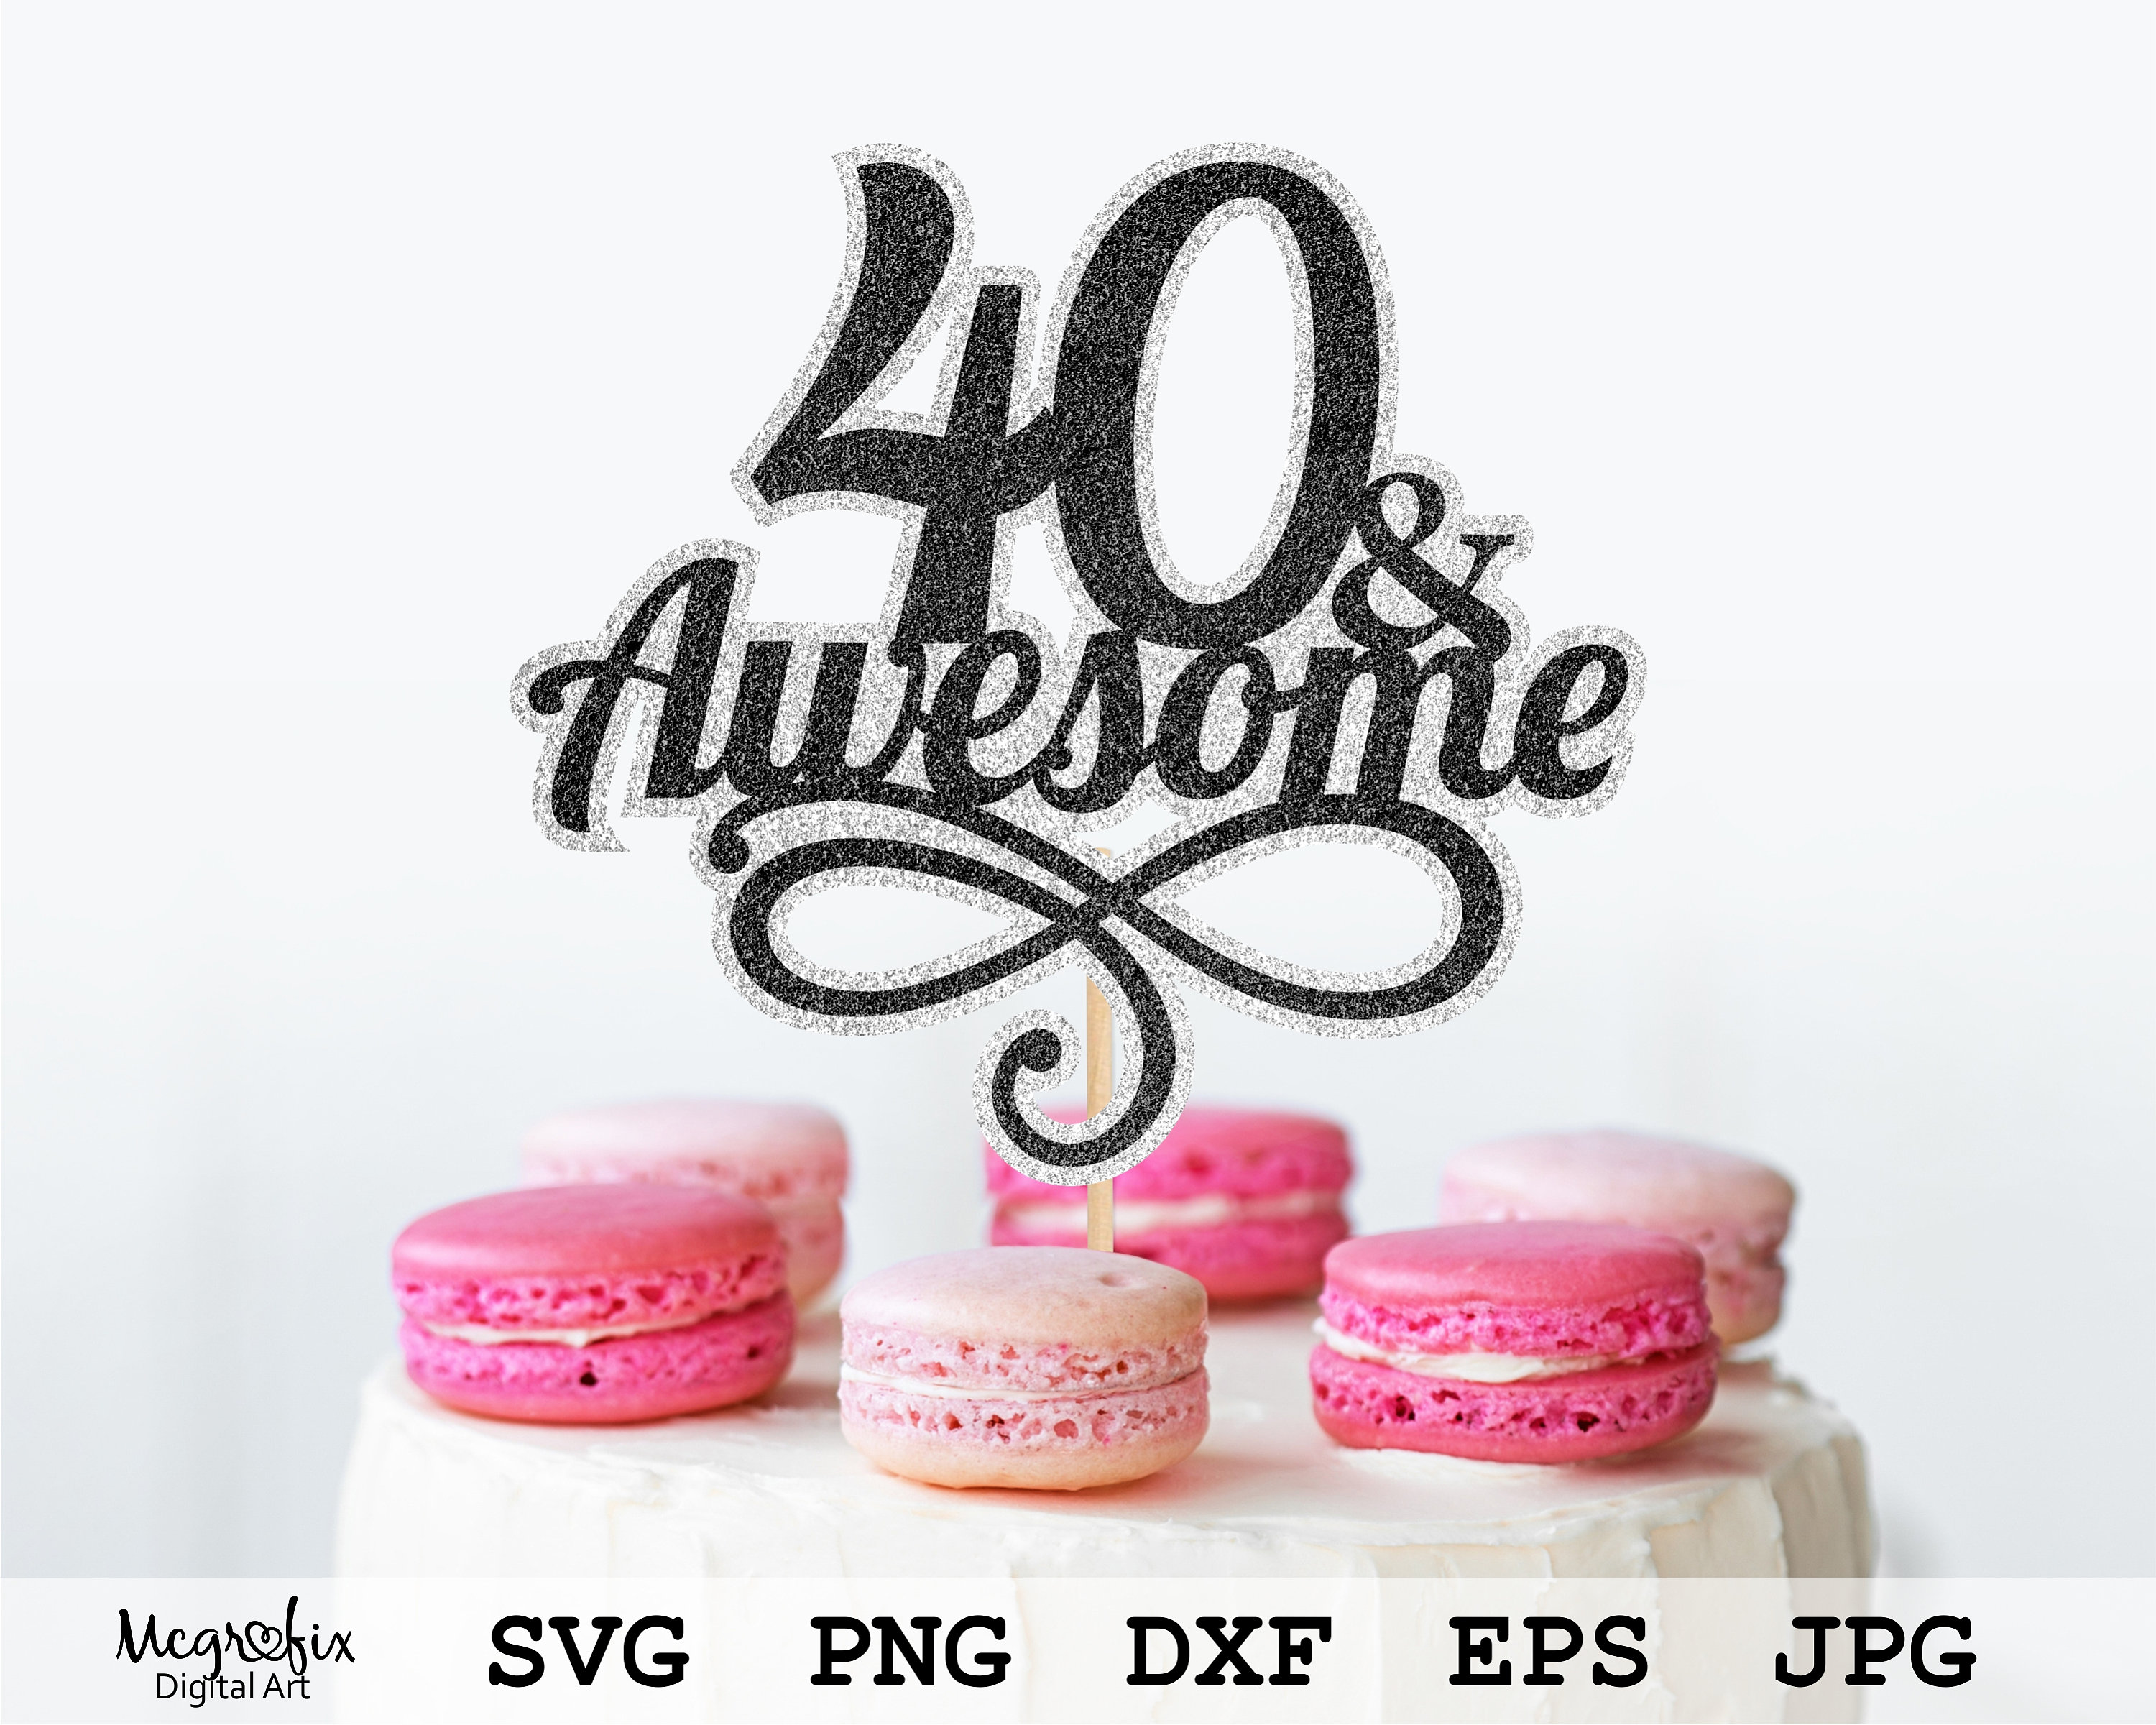 Happy 40th Birthday Personalized Cake Topper Svg Fourty 